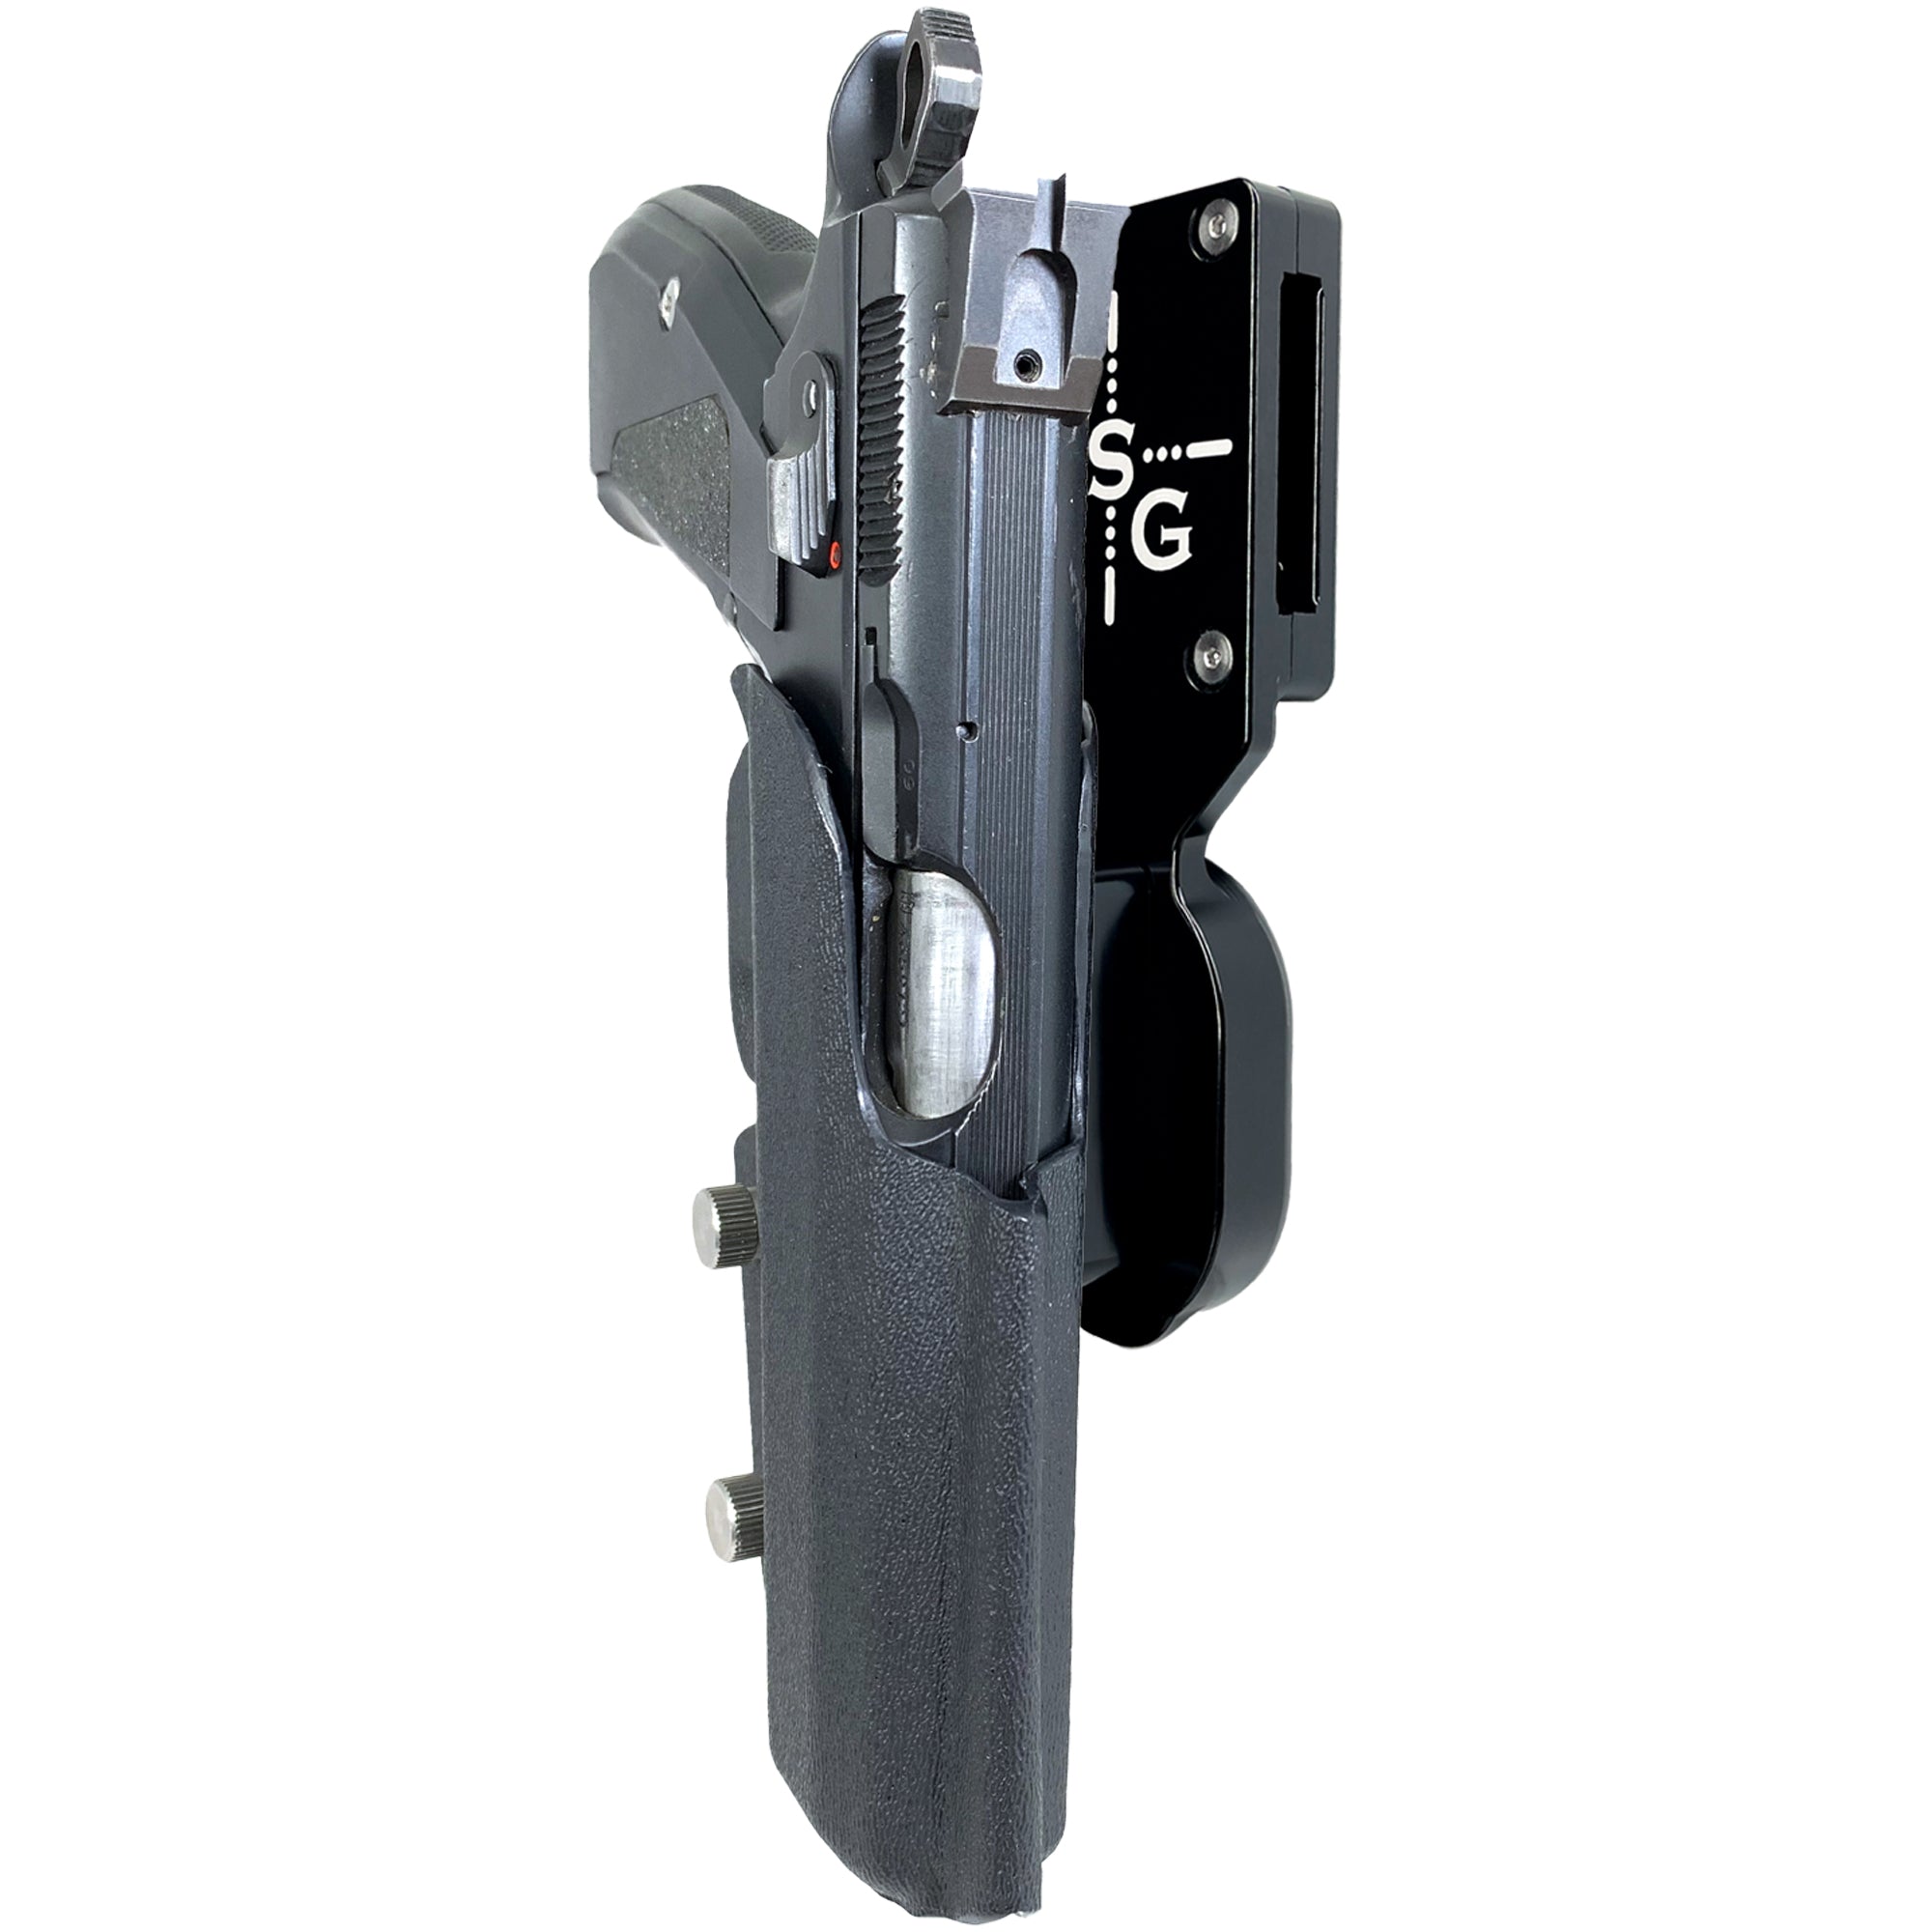 CZ 75 SP-01 Pro Heavy Duty Competition Holster